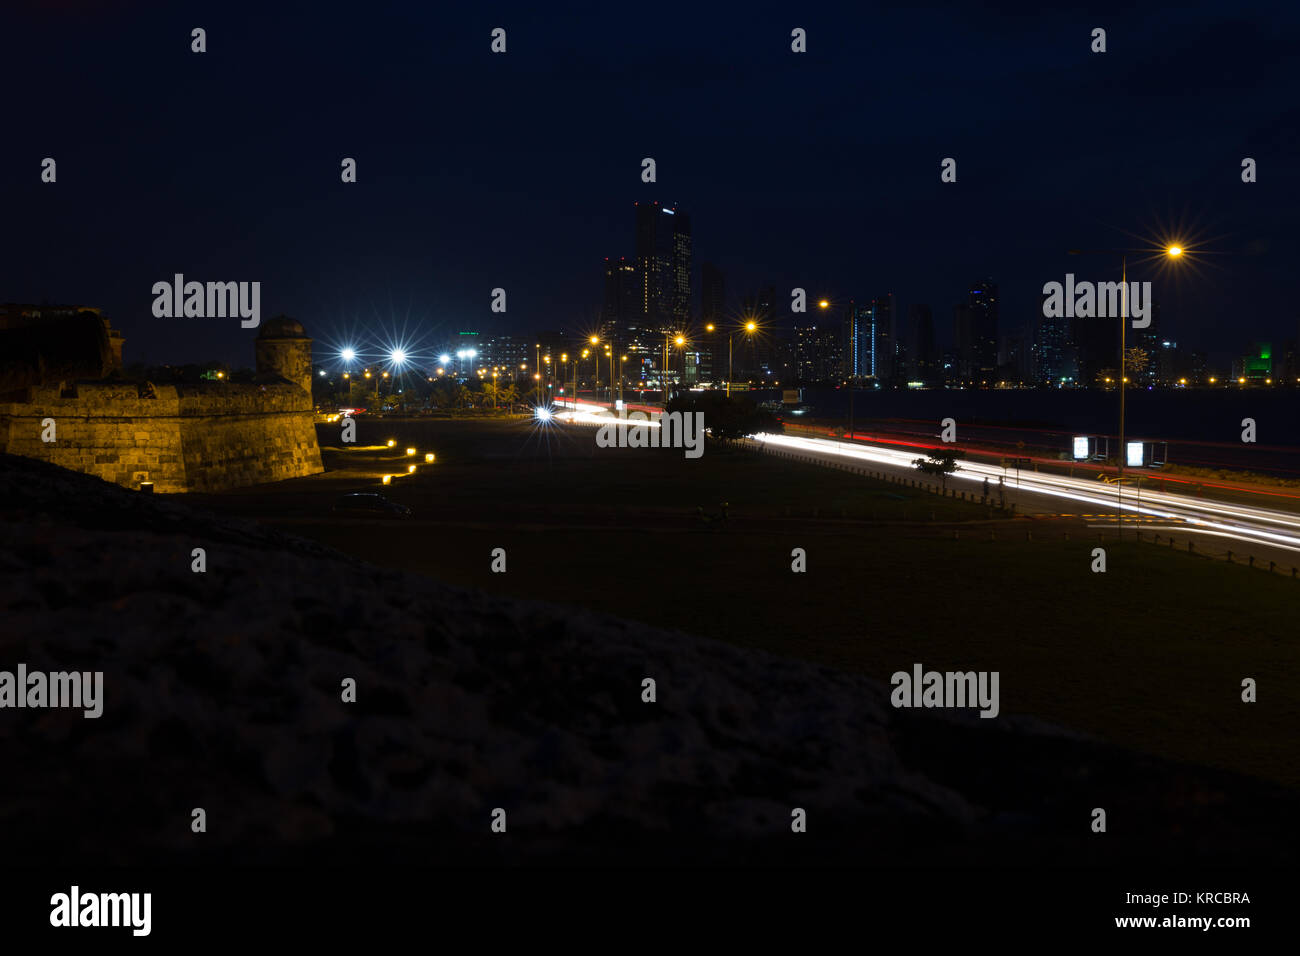 Cartagena square with arches at night Stock Photo